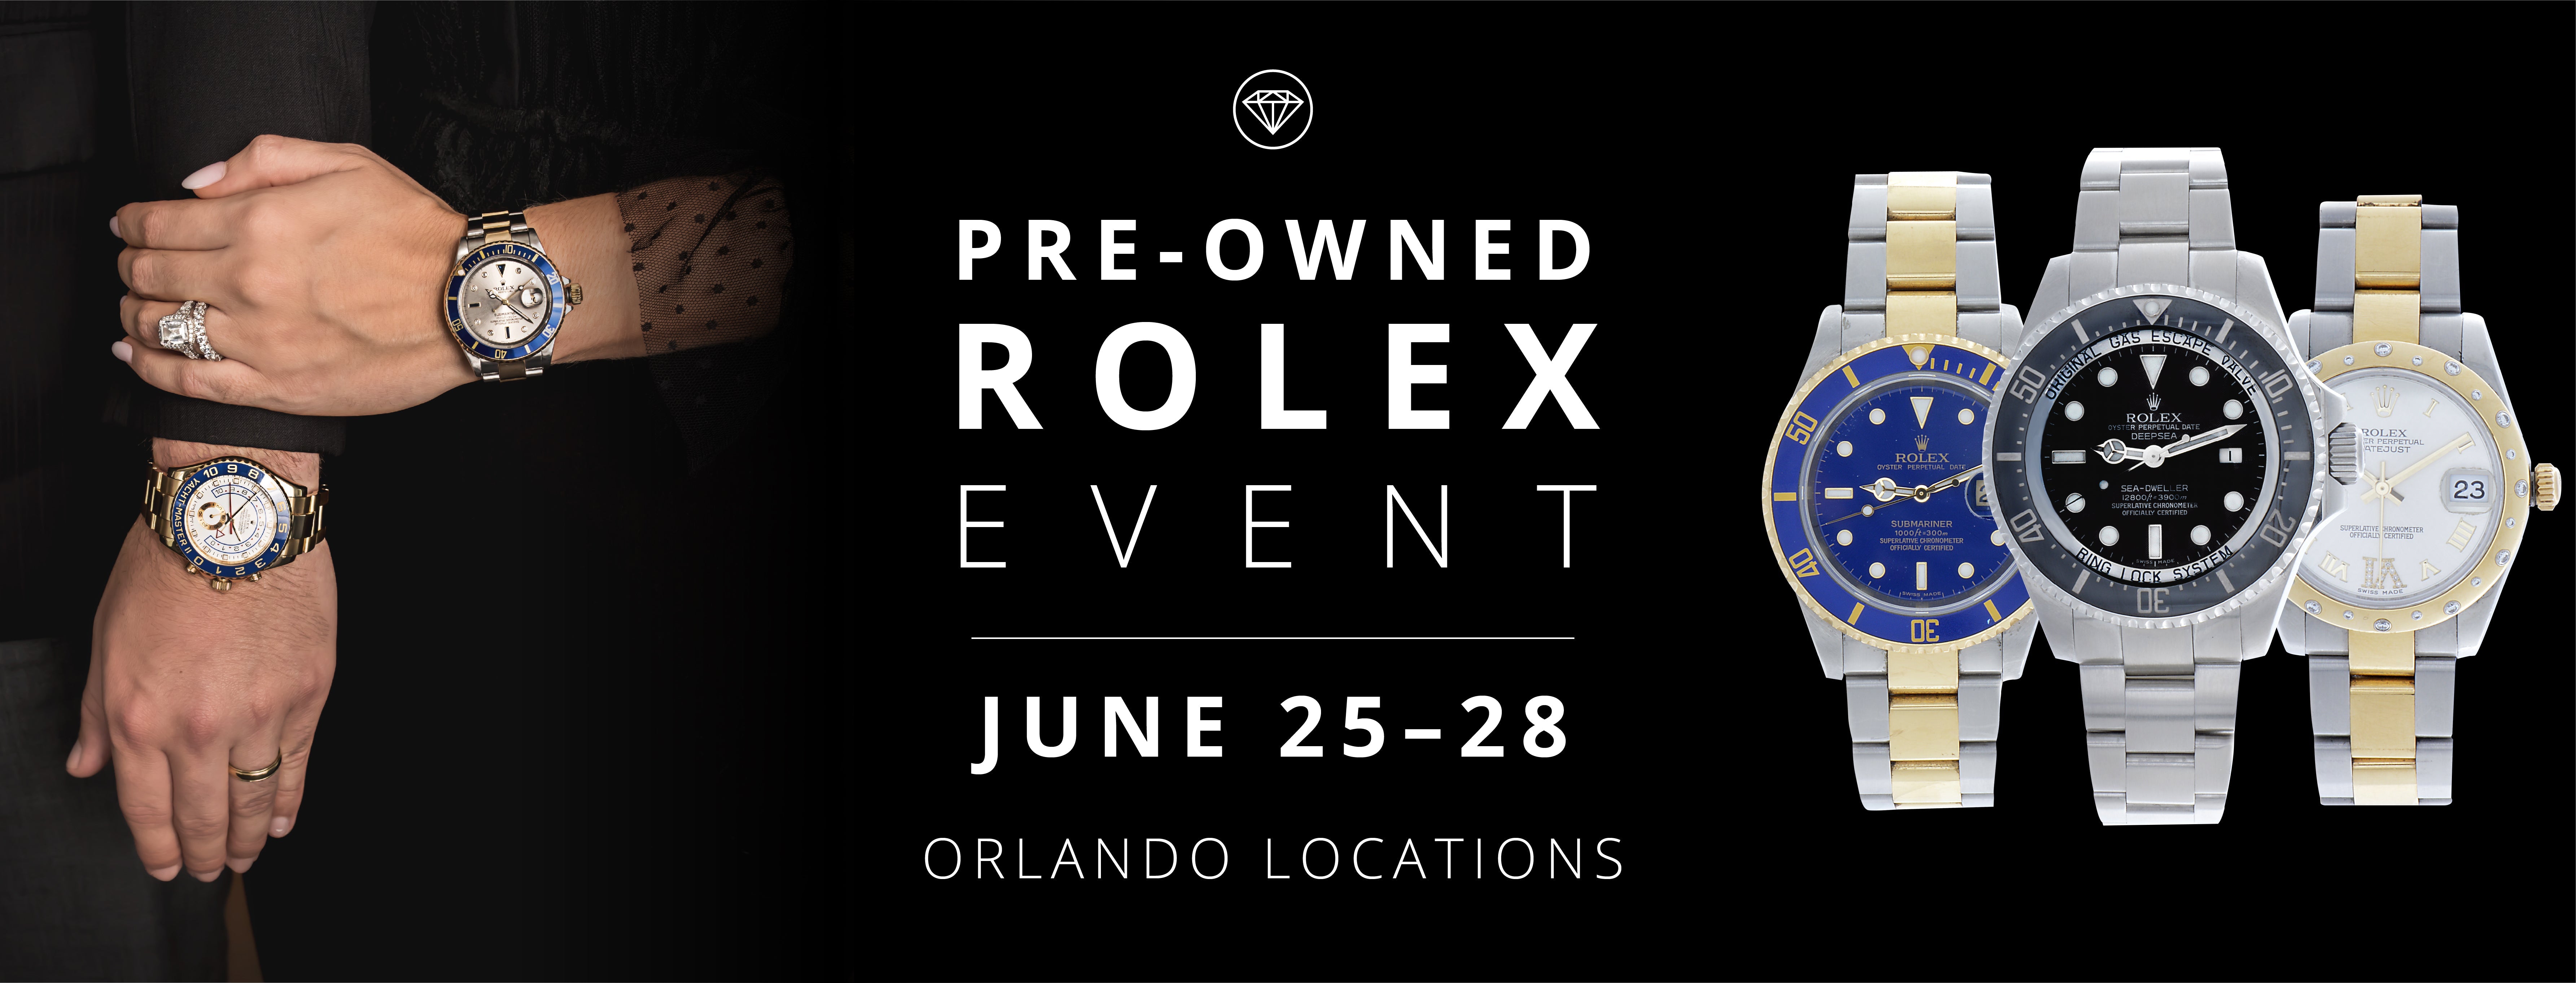 Pre-Owned Rolex Event